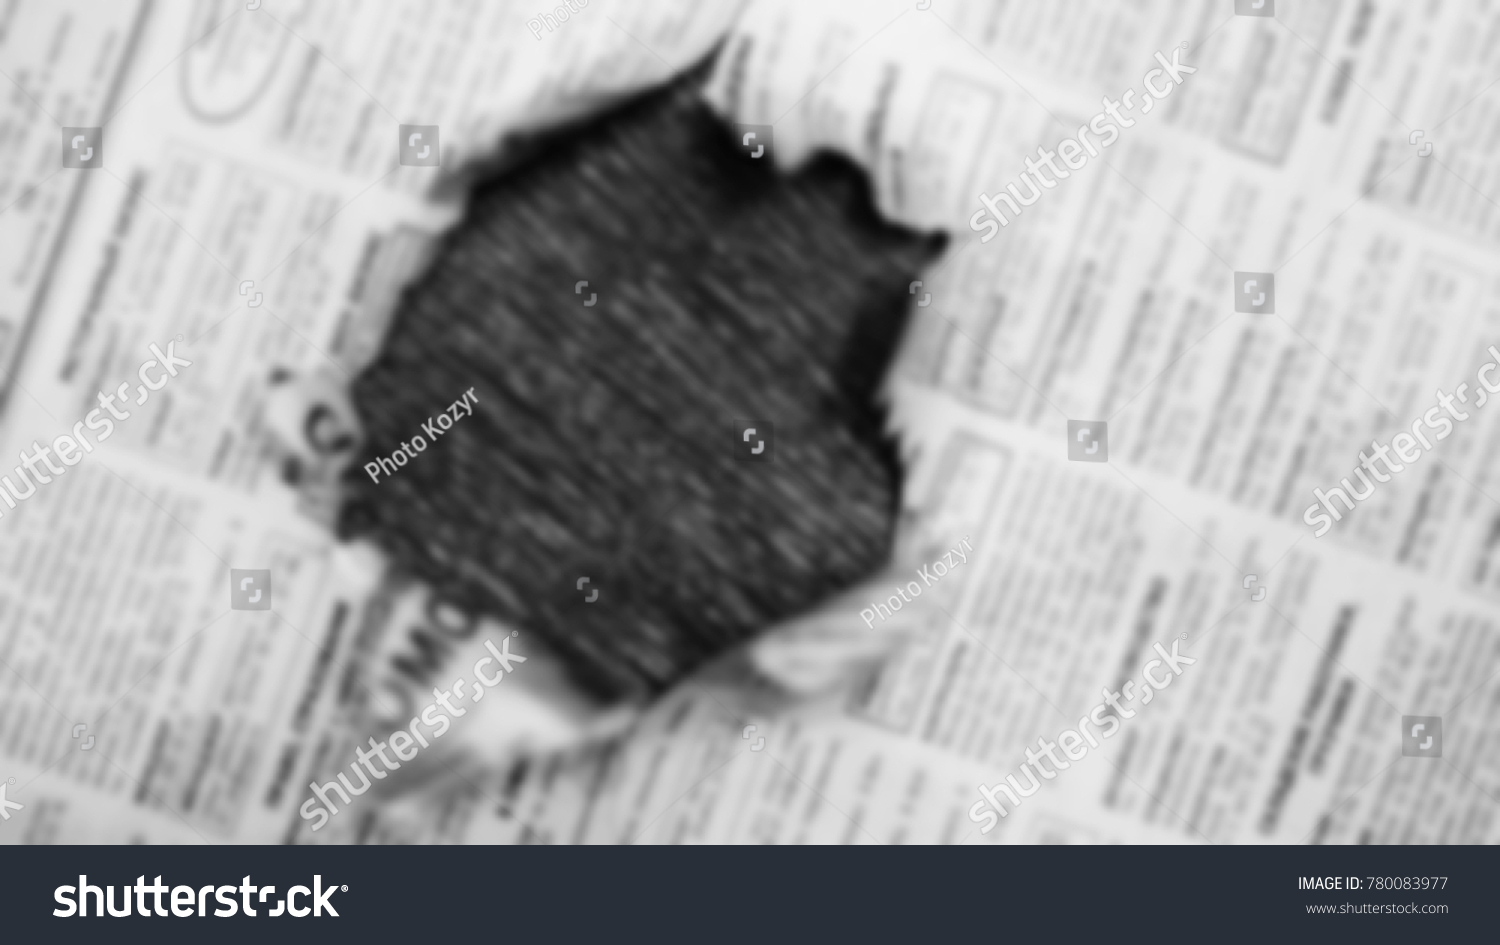 Newspaper page with hole in the middle. Daily paper with news, articles, headlines, photos and text is ripped. Old journal texture for background, blurred #780083977